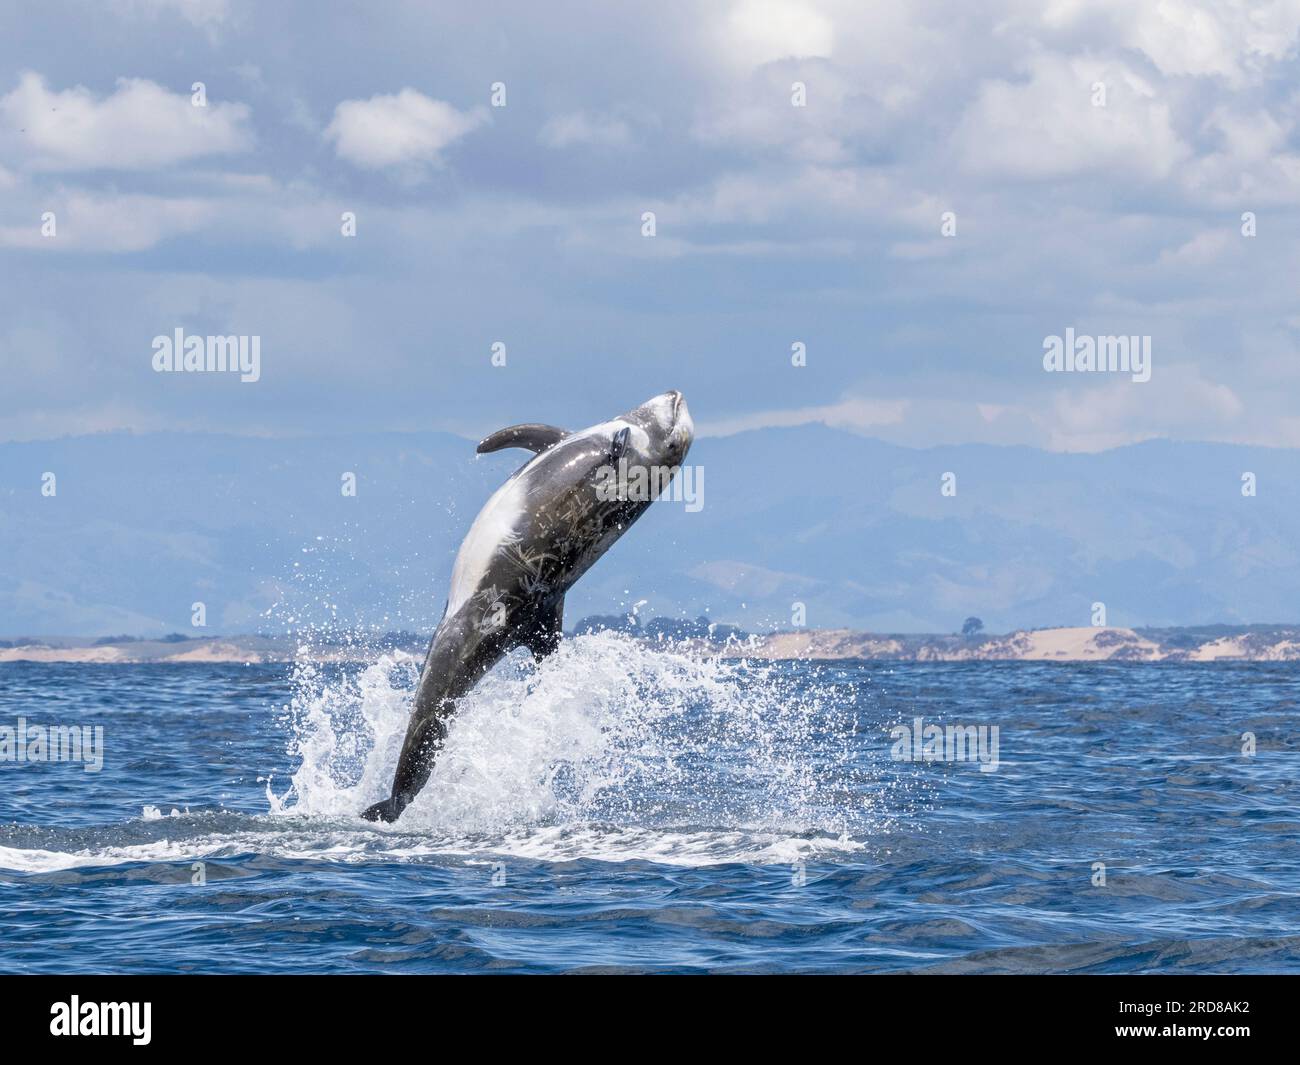 Adult Risso's dolphin (Grampus griseus), leaping into the air in Monterey Bay Marine Sanctuary, California, United States of America, North America Stock Photo